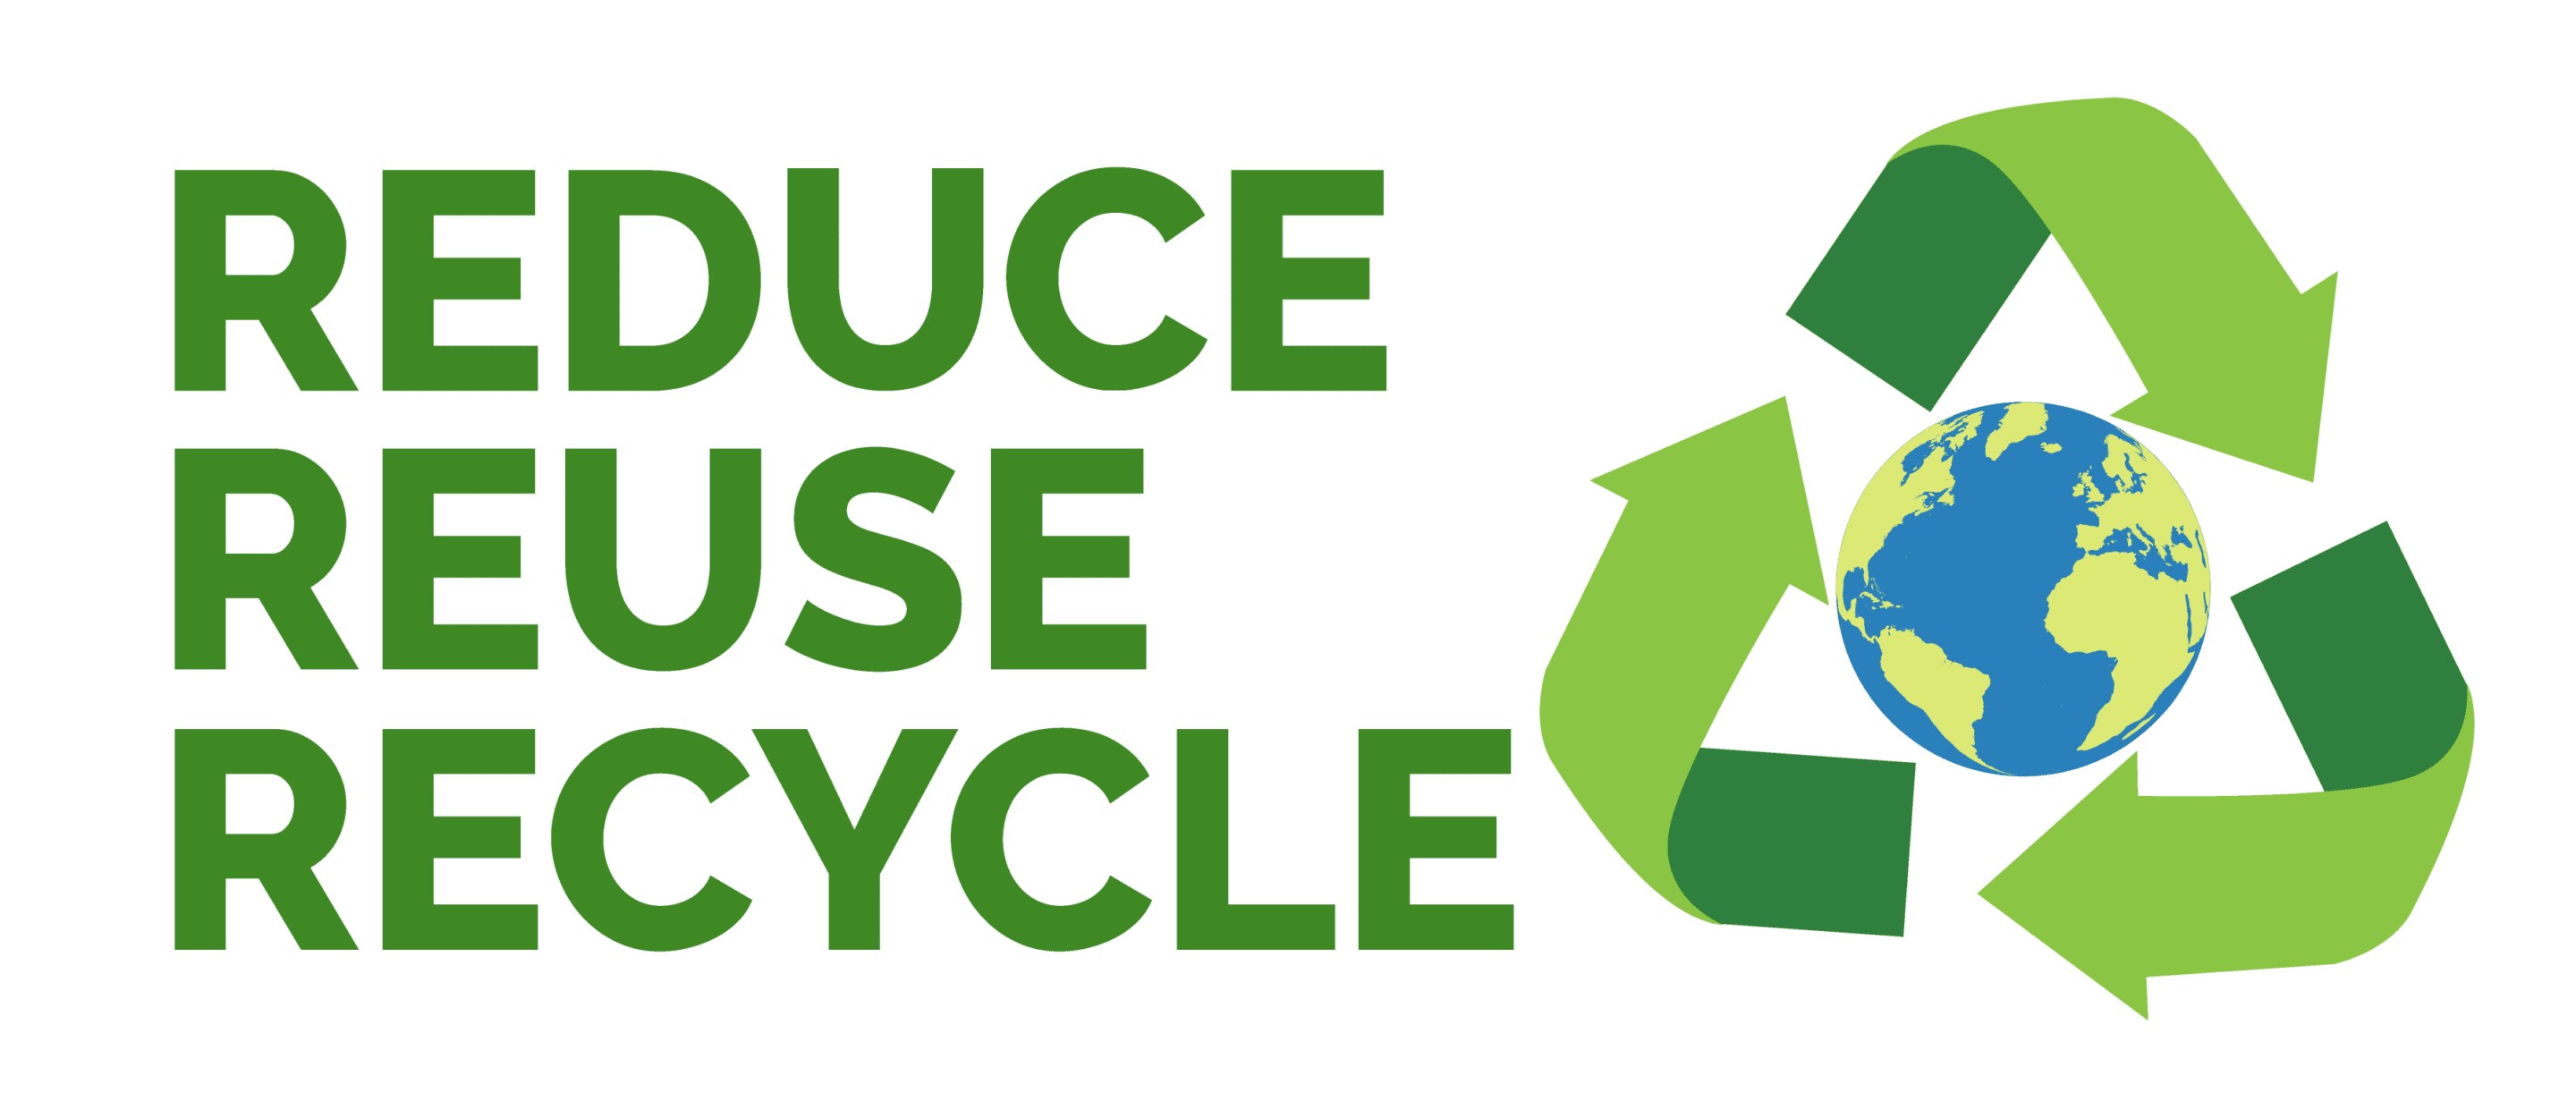 Save our planet - reduse, reuse, and recycle!